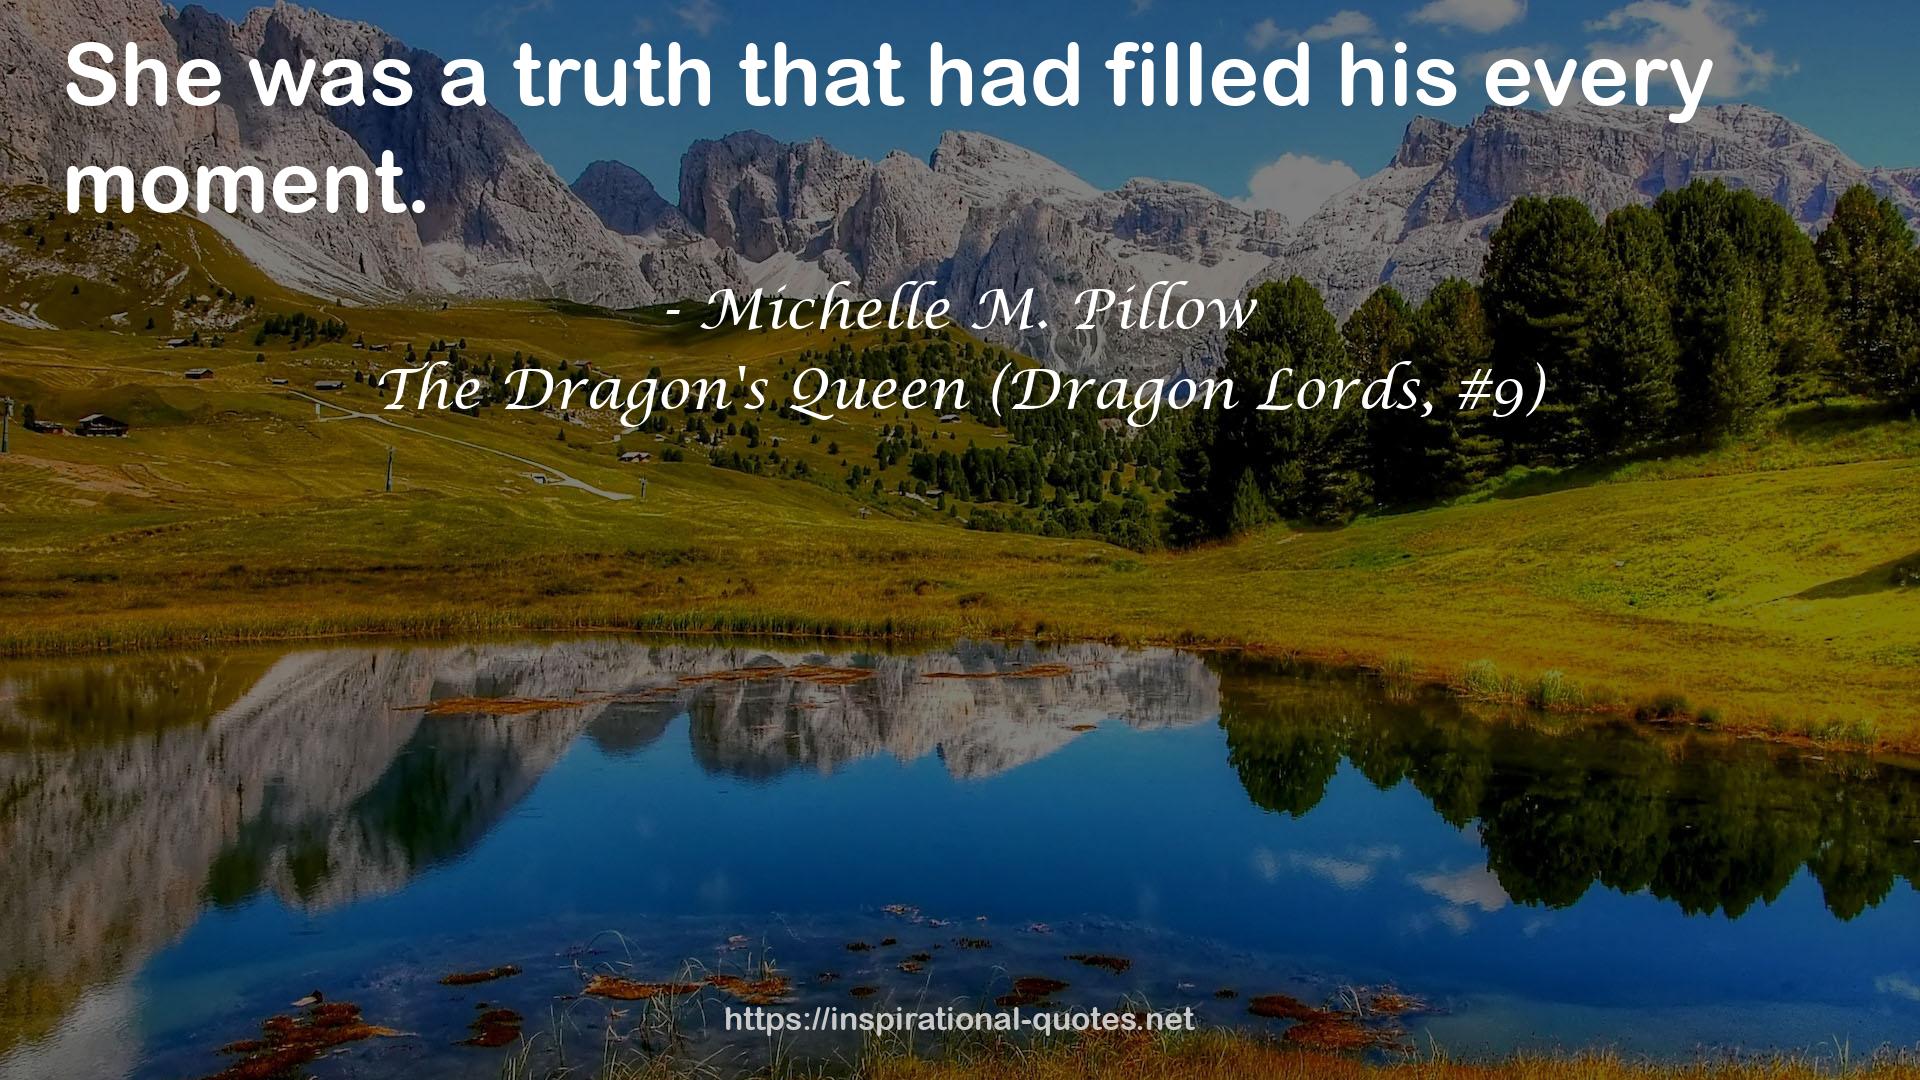 The Dragon's Queen (Dragon Lords, #9) QUOTES